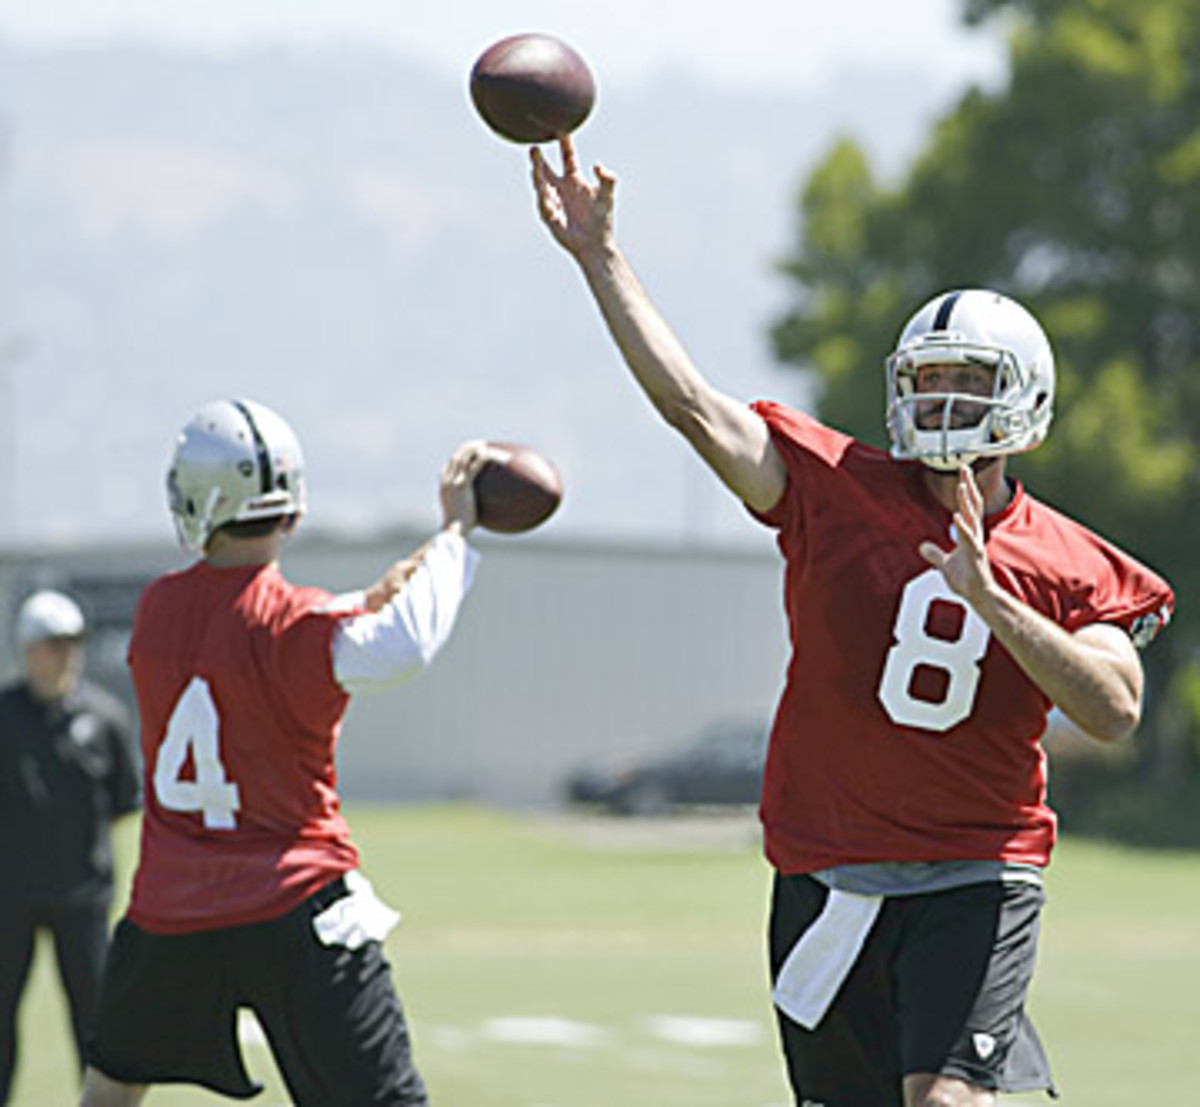 With his job potentially on the line, Allen will have to choose between underwhelming veteran Schaub (right) or unproven rookie Carr (left). (Ben Margot/AP)